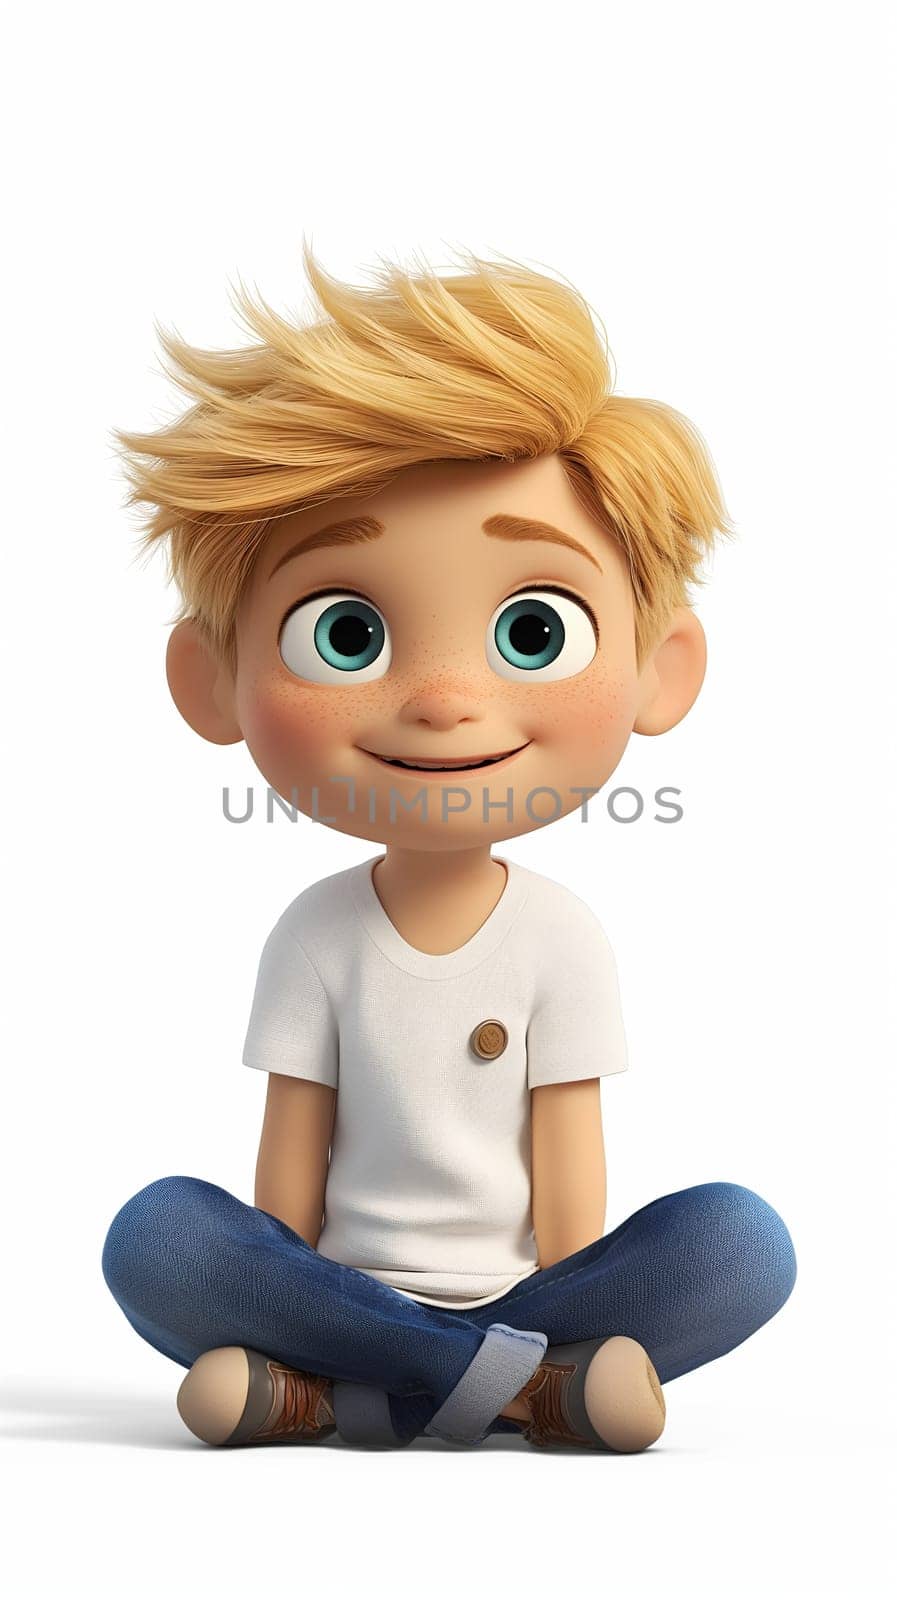 A cheerful animated young boy with blonde hair sits cross-legged, wearing a casual white t-shirt and blue jeans, exuding a friendly demeanor against a white backdrop - Generative AI